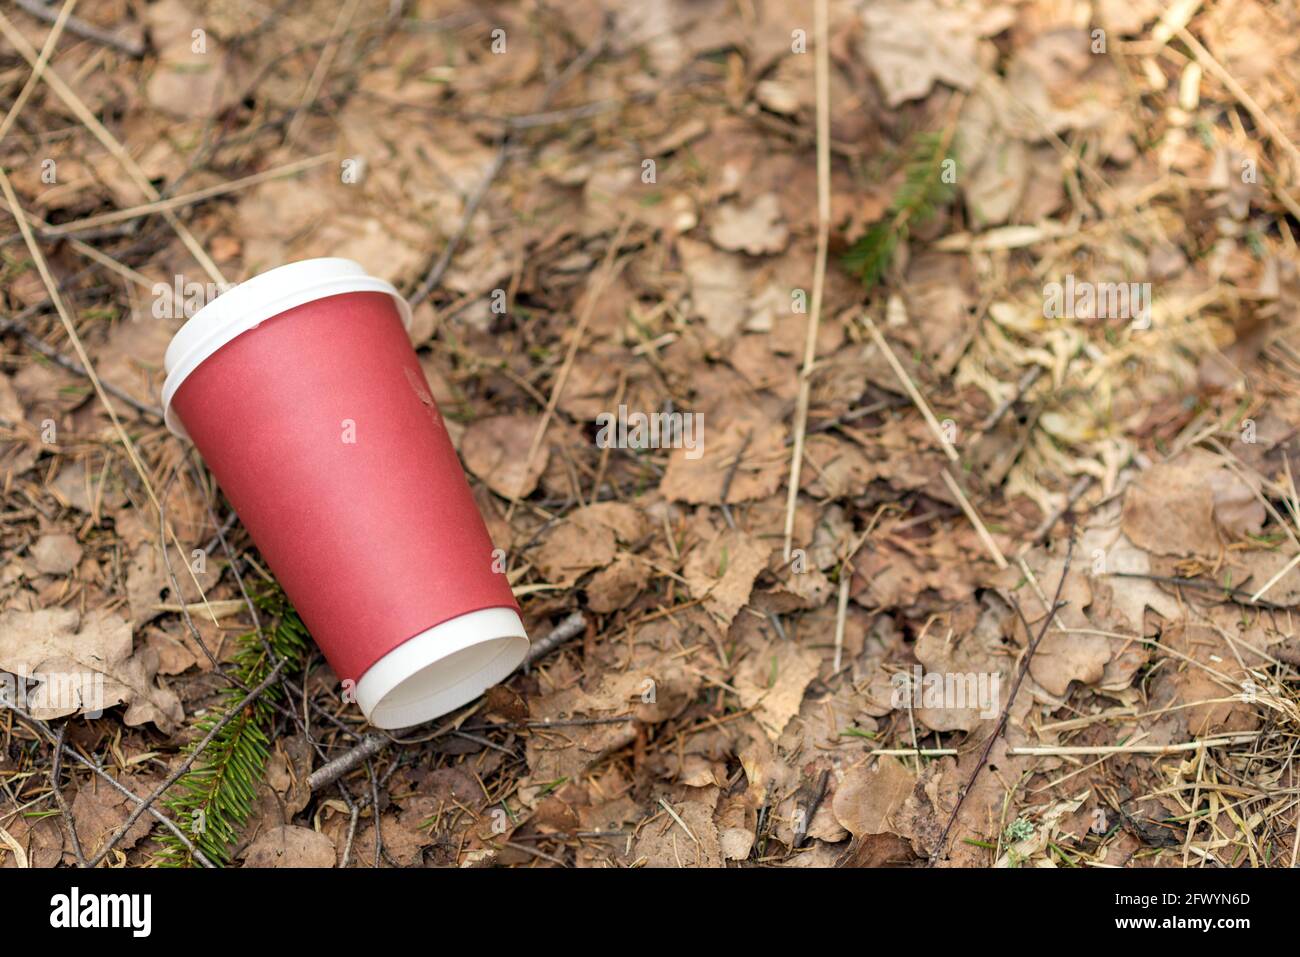 jeg lytter til musik pubertet det er nytteløst Paper cup with coffee or drink outdoor on a background of forest nature.  People left behind trash. The concept of pollution of nature and the  environm Stock Photo - Alamy